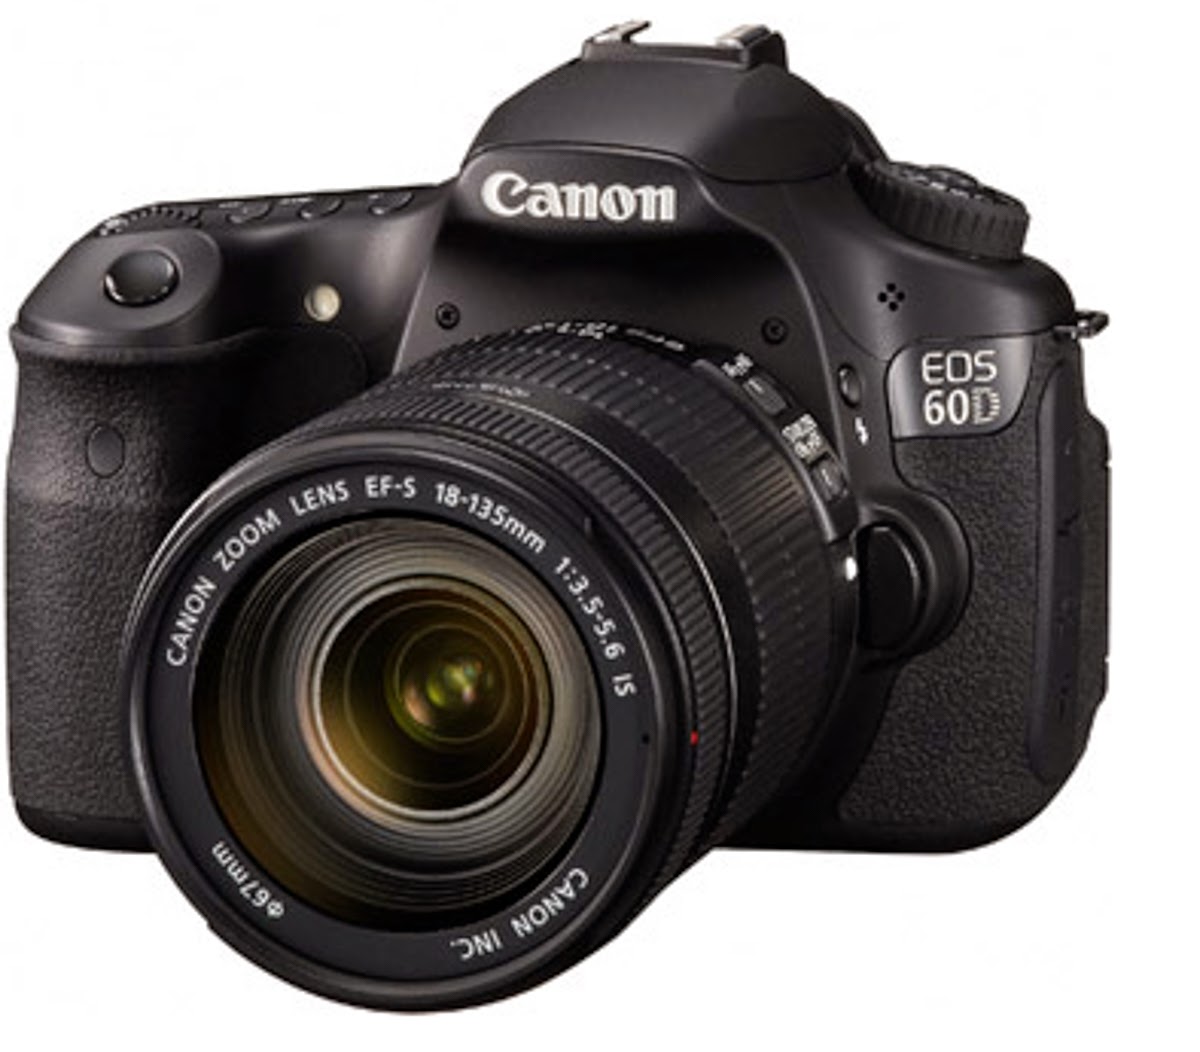 Canon EOS 60D: Links to Professional / Consumer Reviews